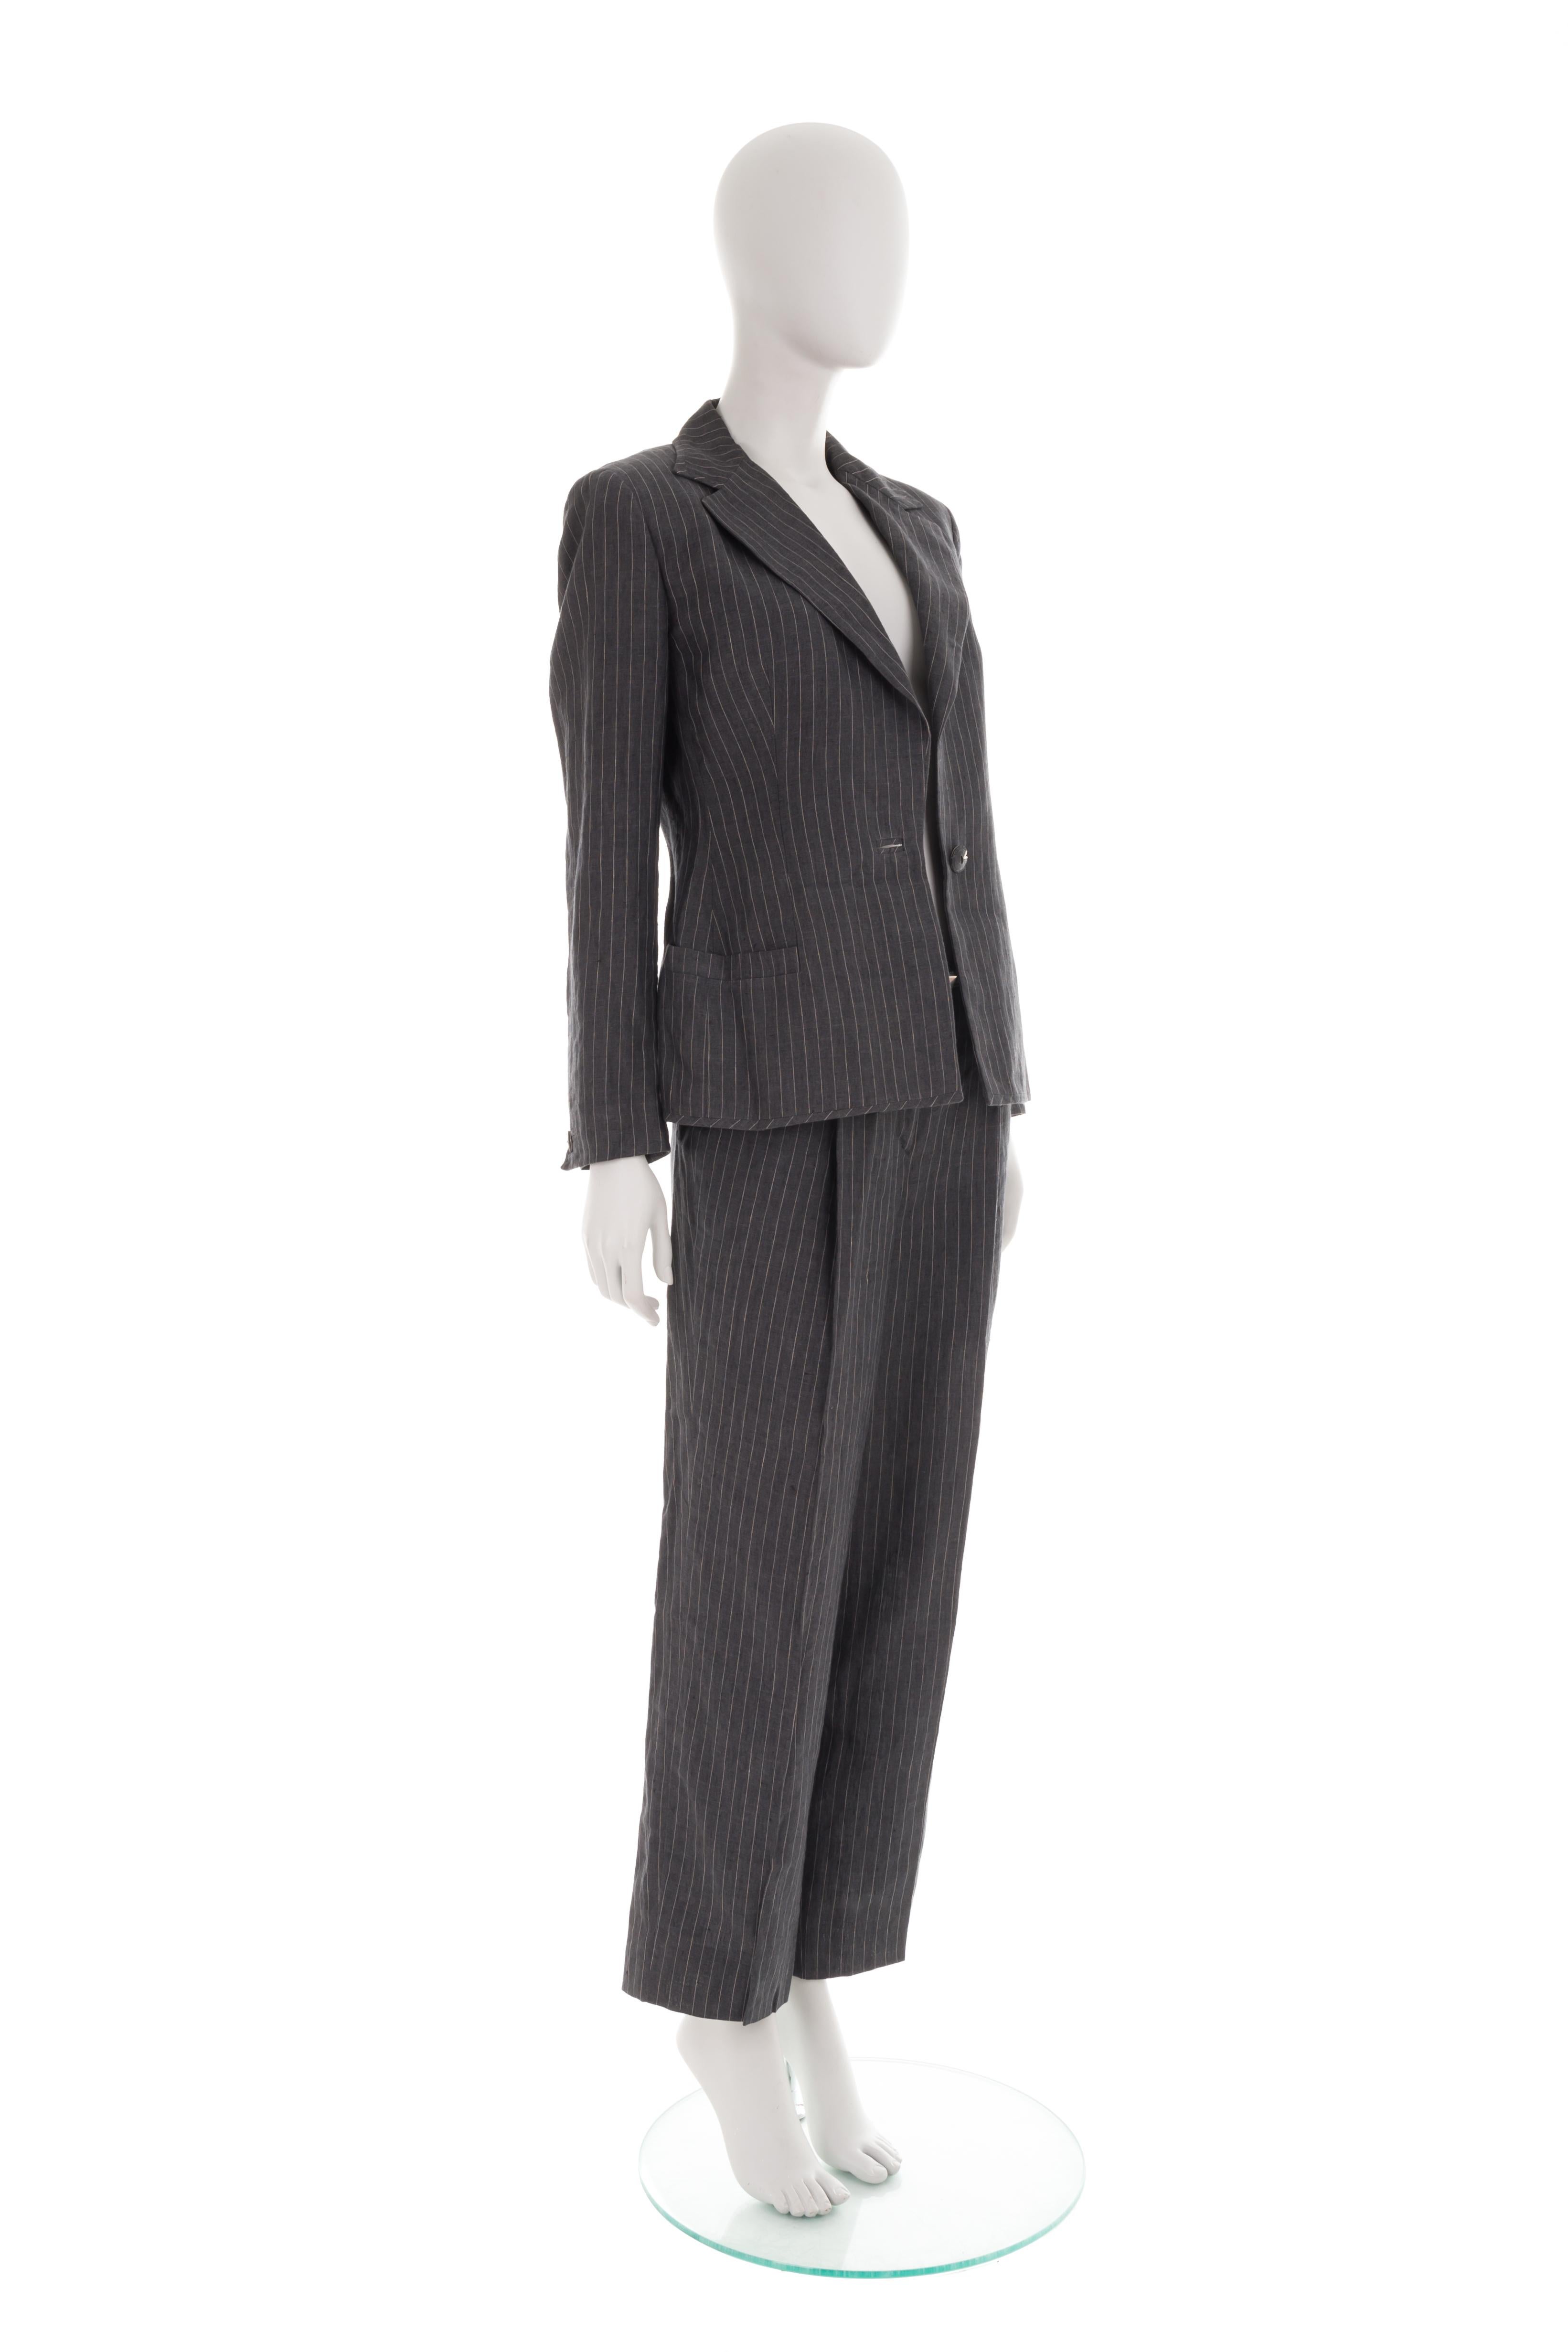 - Versace by Donatella Versace 
- Sold by Gold Palms Vintage 
- Dark grey striped linen suit
- Large lapel padded jacket
- Front logo button
- Relaxed suit trousers
- Additional mini belt with logo 
- Size: IT 44